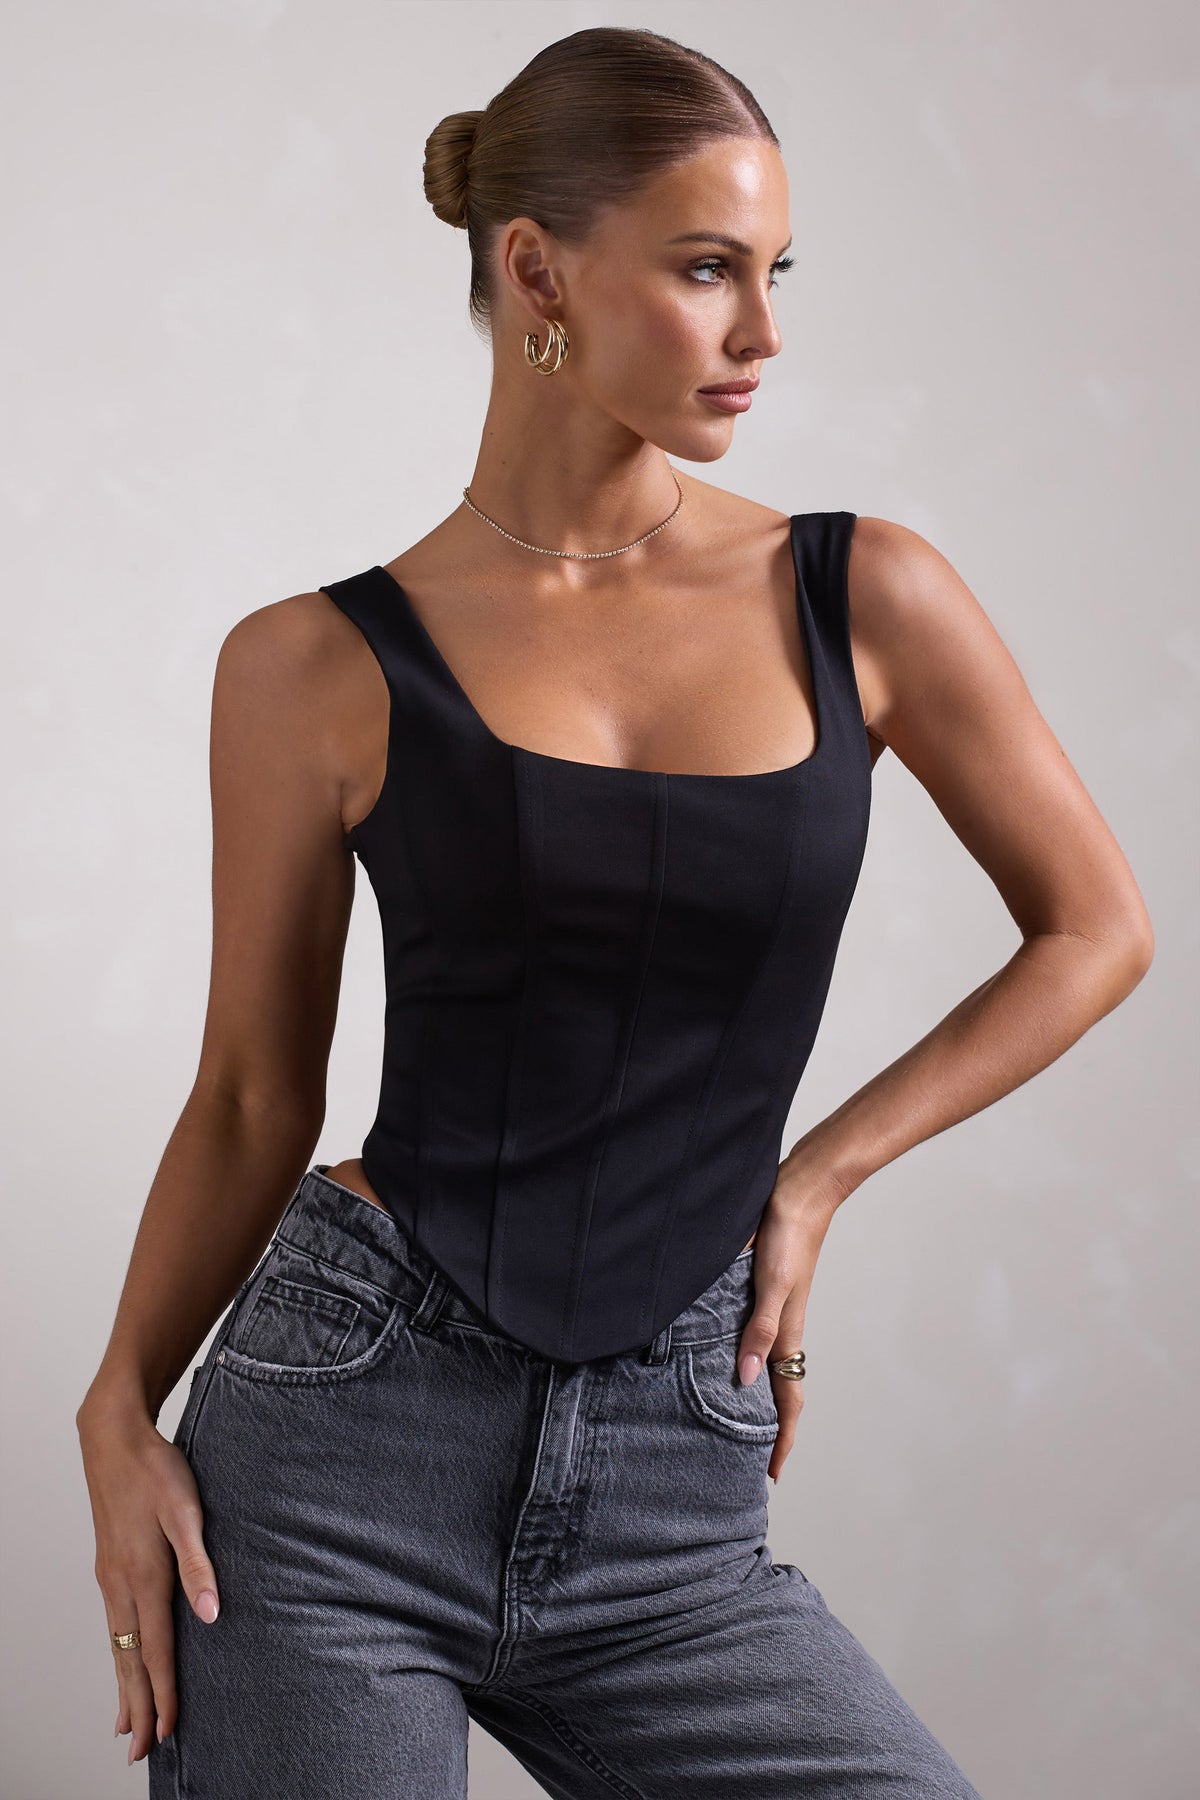 Urban Outfitters Uo Haley Ponte Bandeau Corset Top in Black